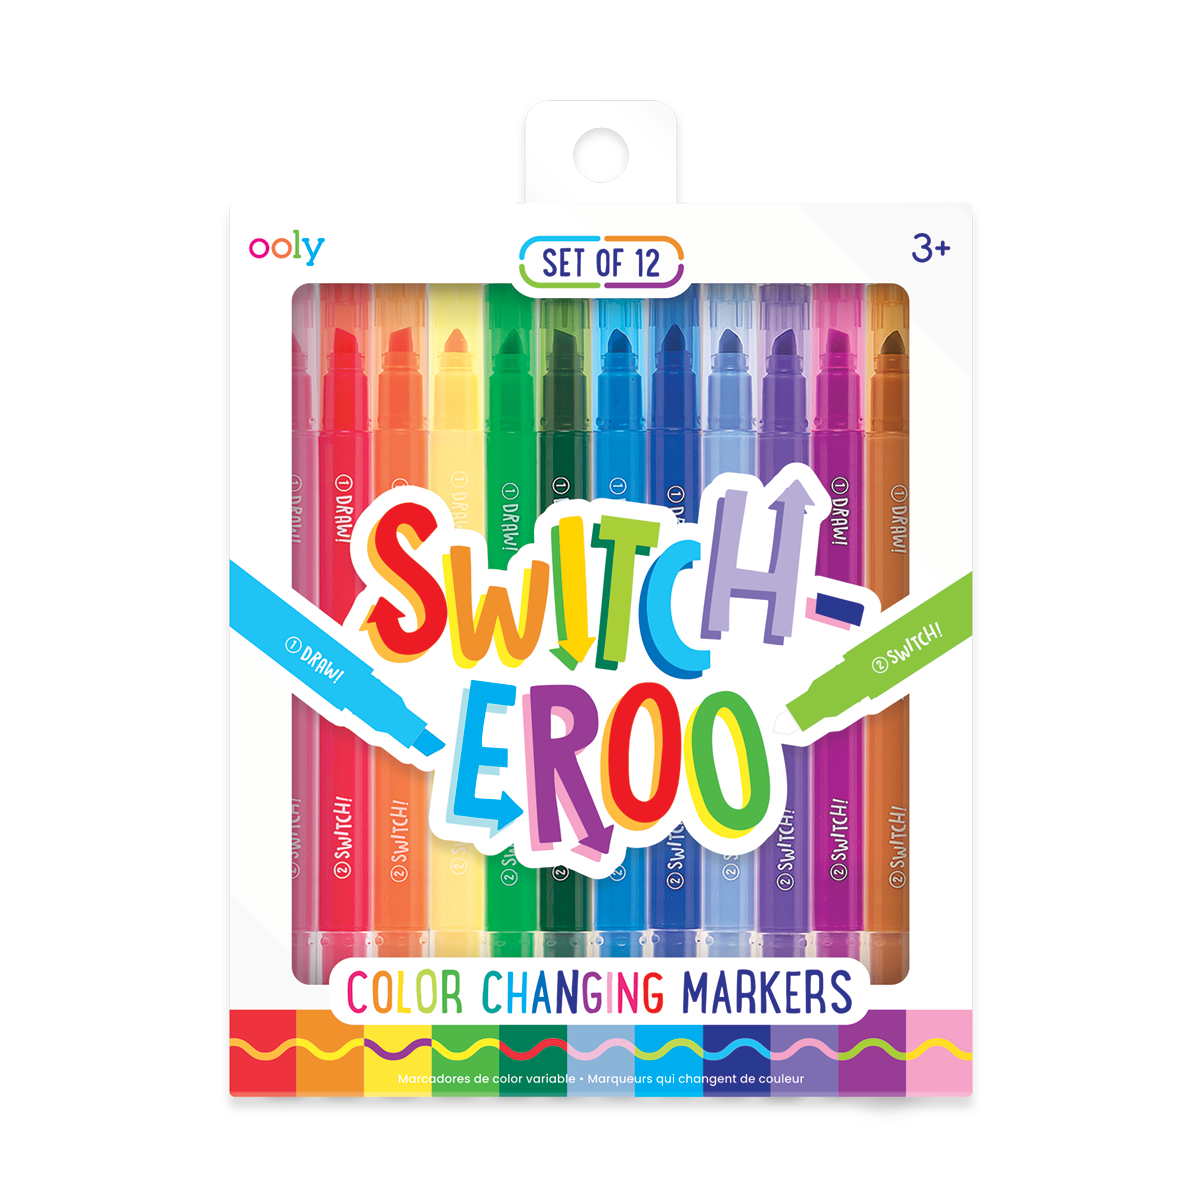 Ooly 12 Pack Switch-eroo Double Sided Color Changing Markers in Vibrant  Colors, Color Changeable Markers are Cool Back to School Supplies for Art